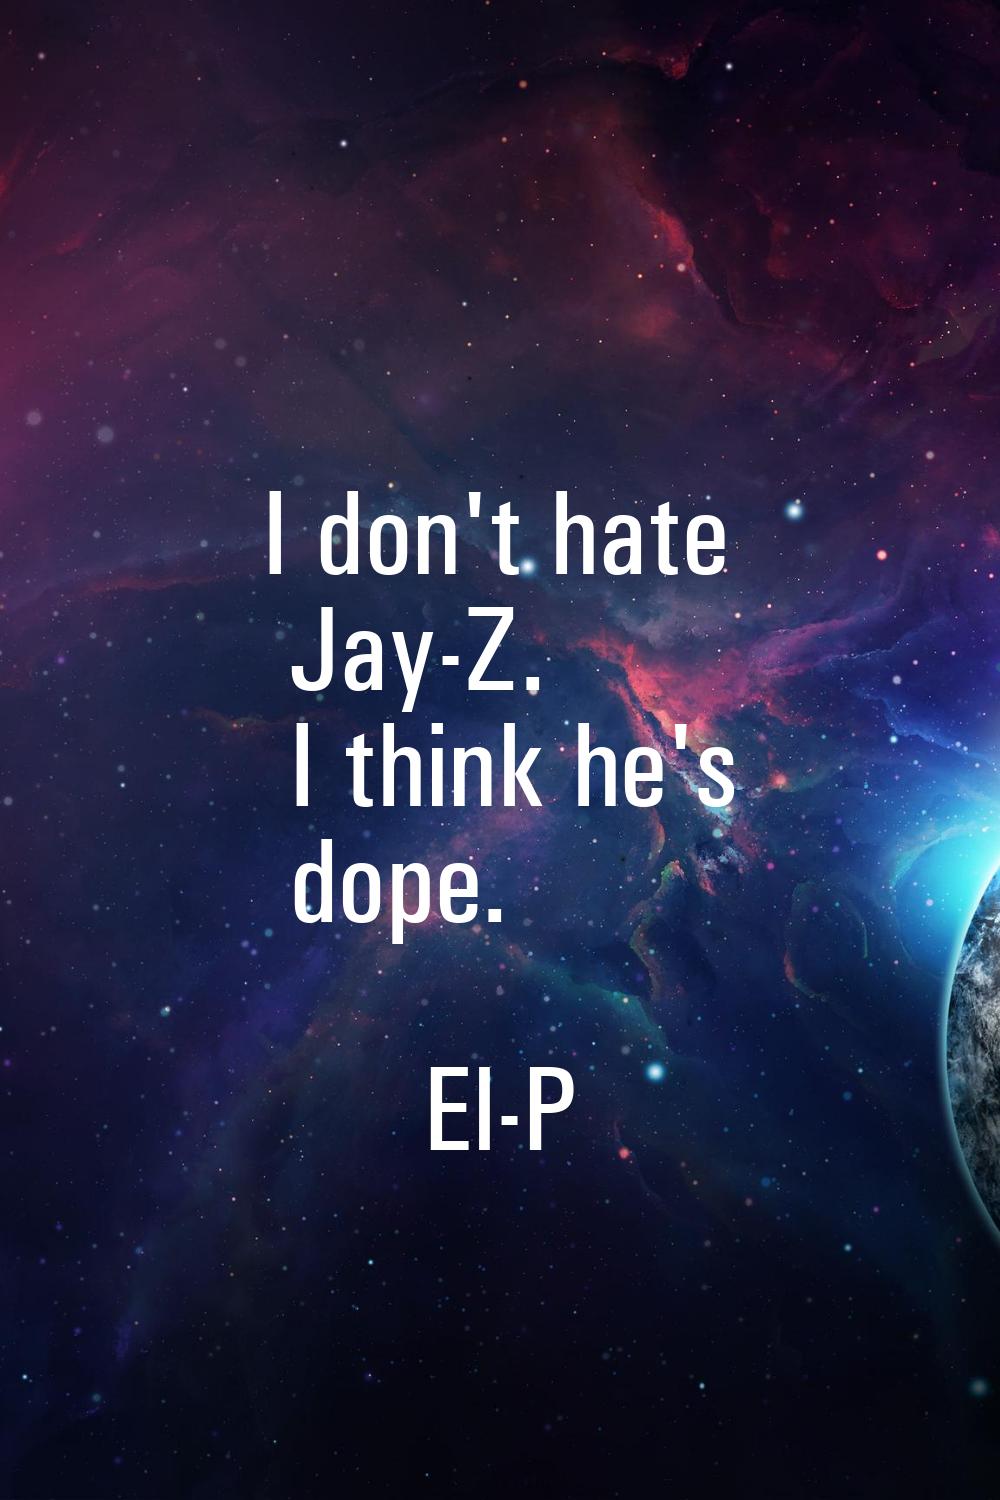 I don't hate Jay-Z. I think he's dope.